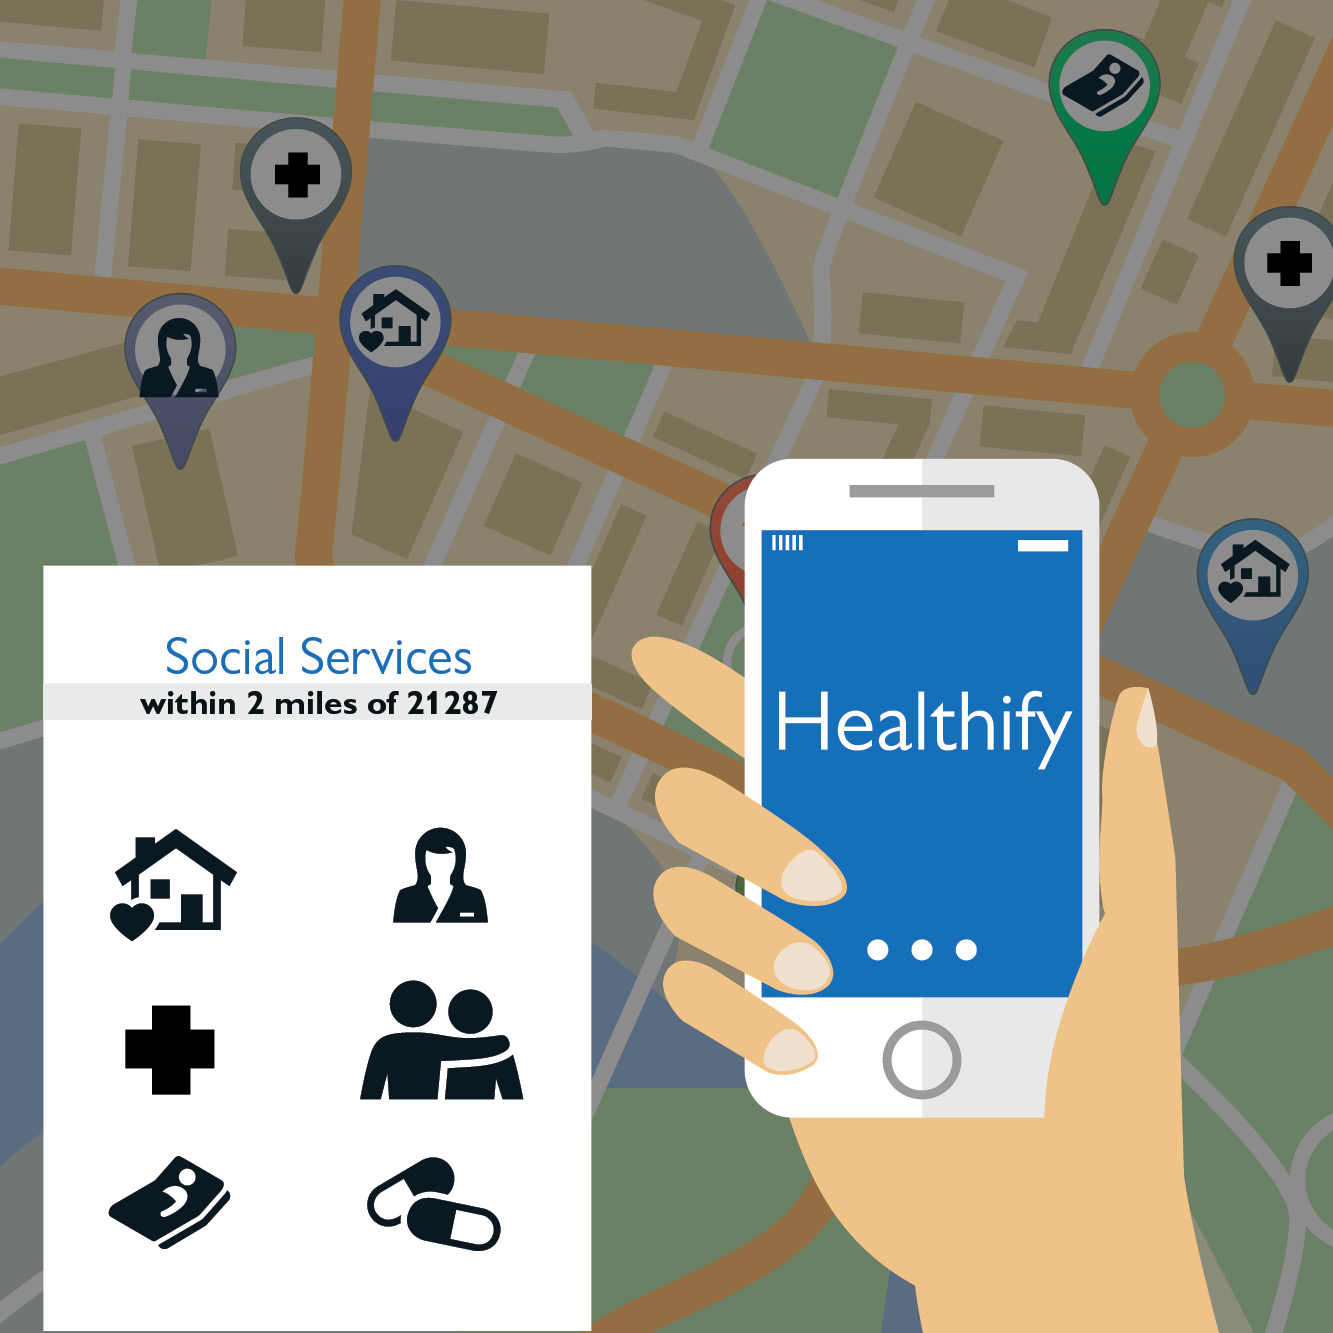 Illustration of a hand holding a smartphone in front of an online map depicting social services within two miles